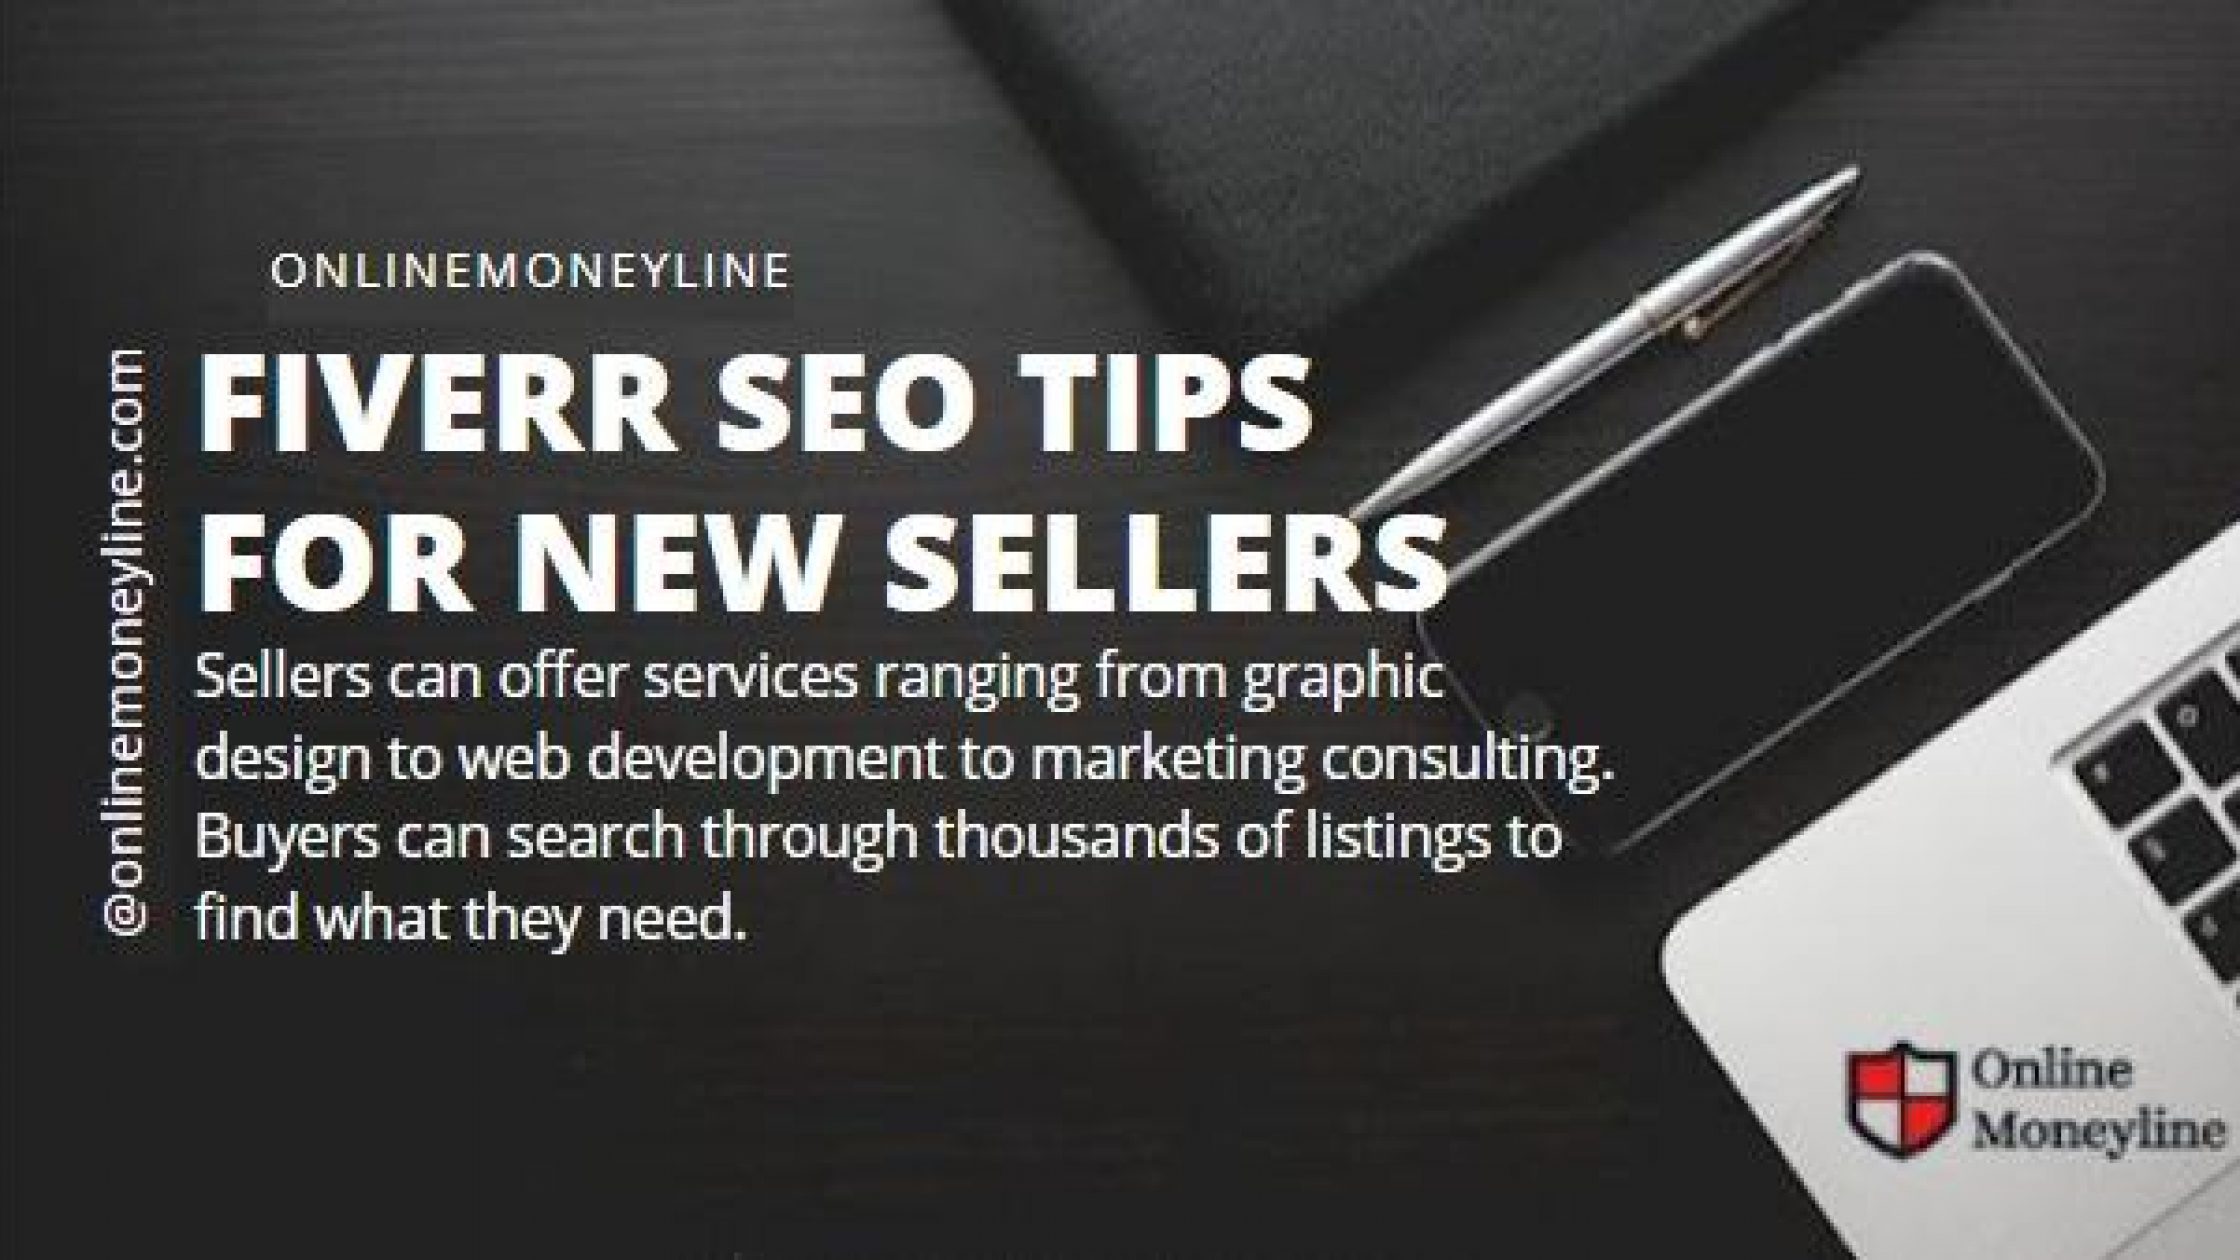 Fiverr SEO Tips For New Sellers